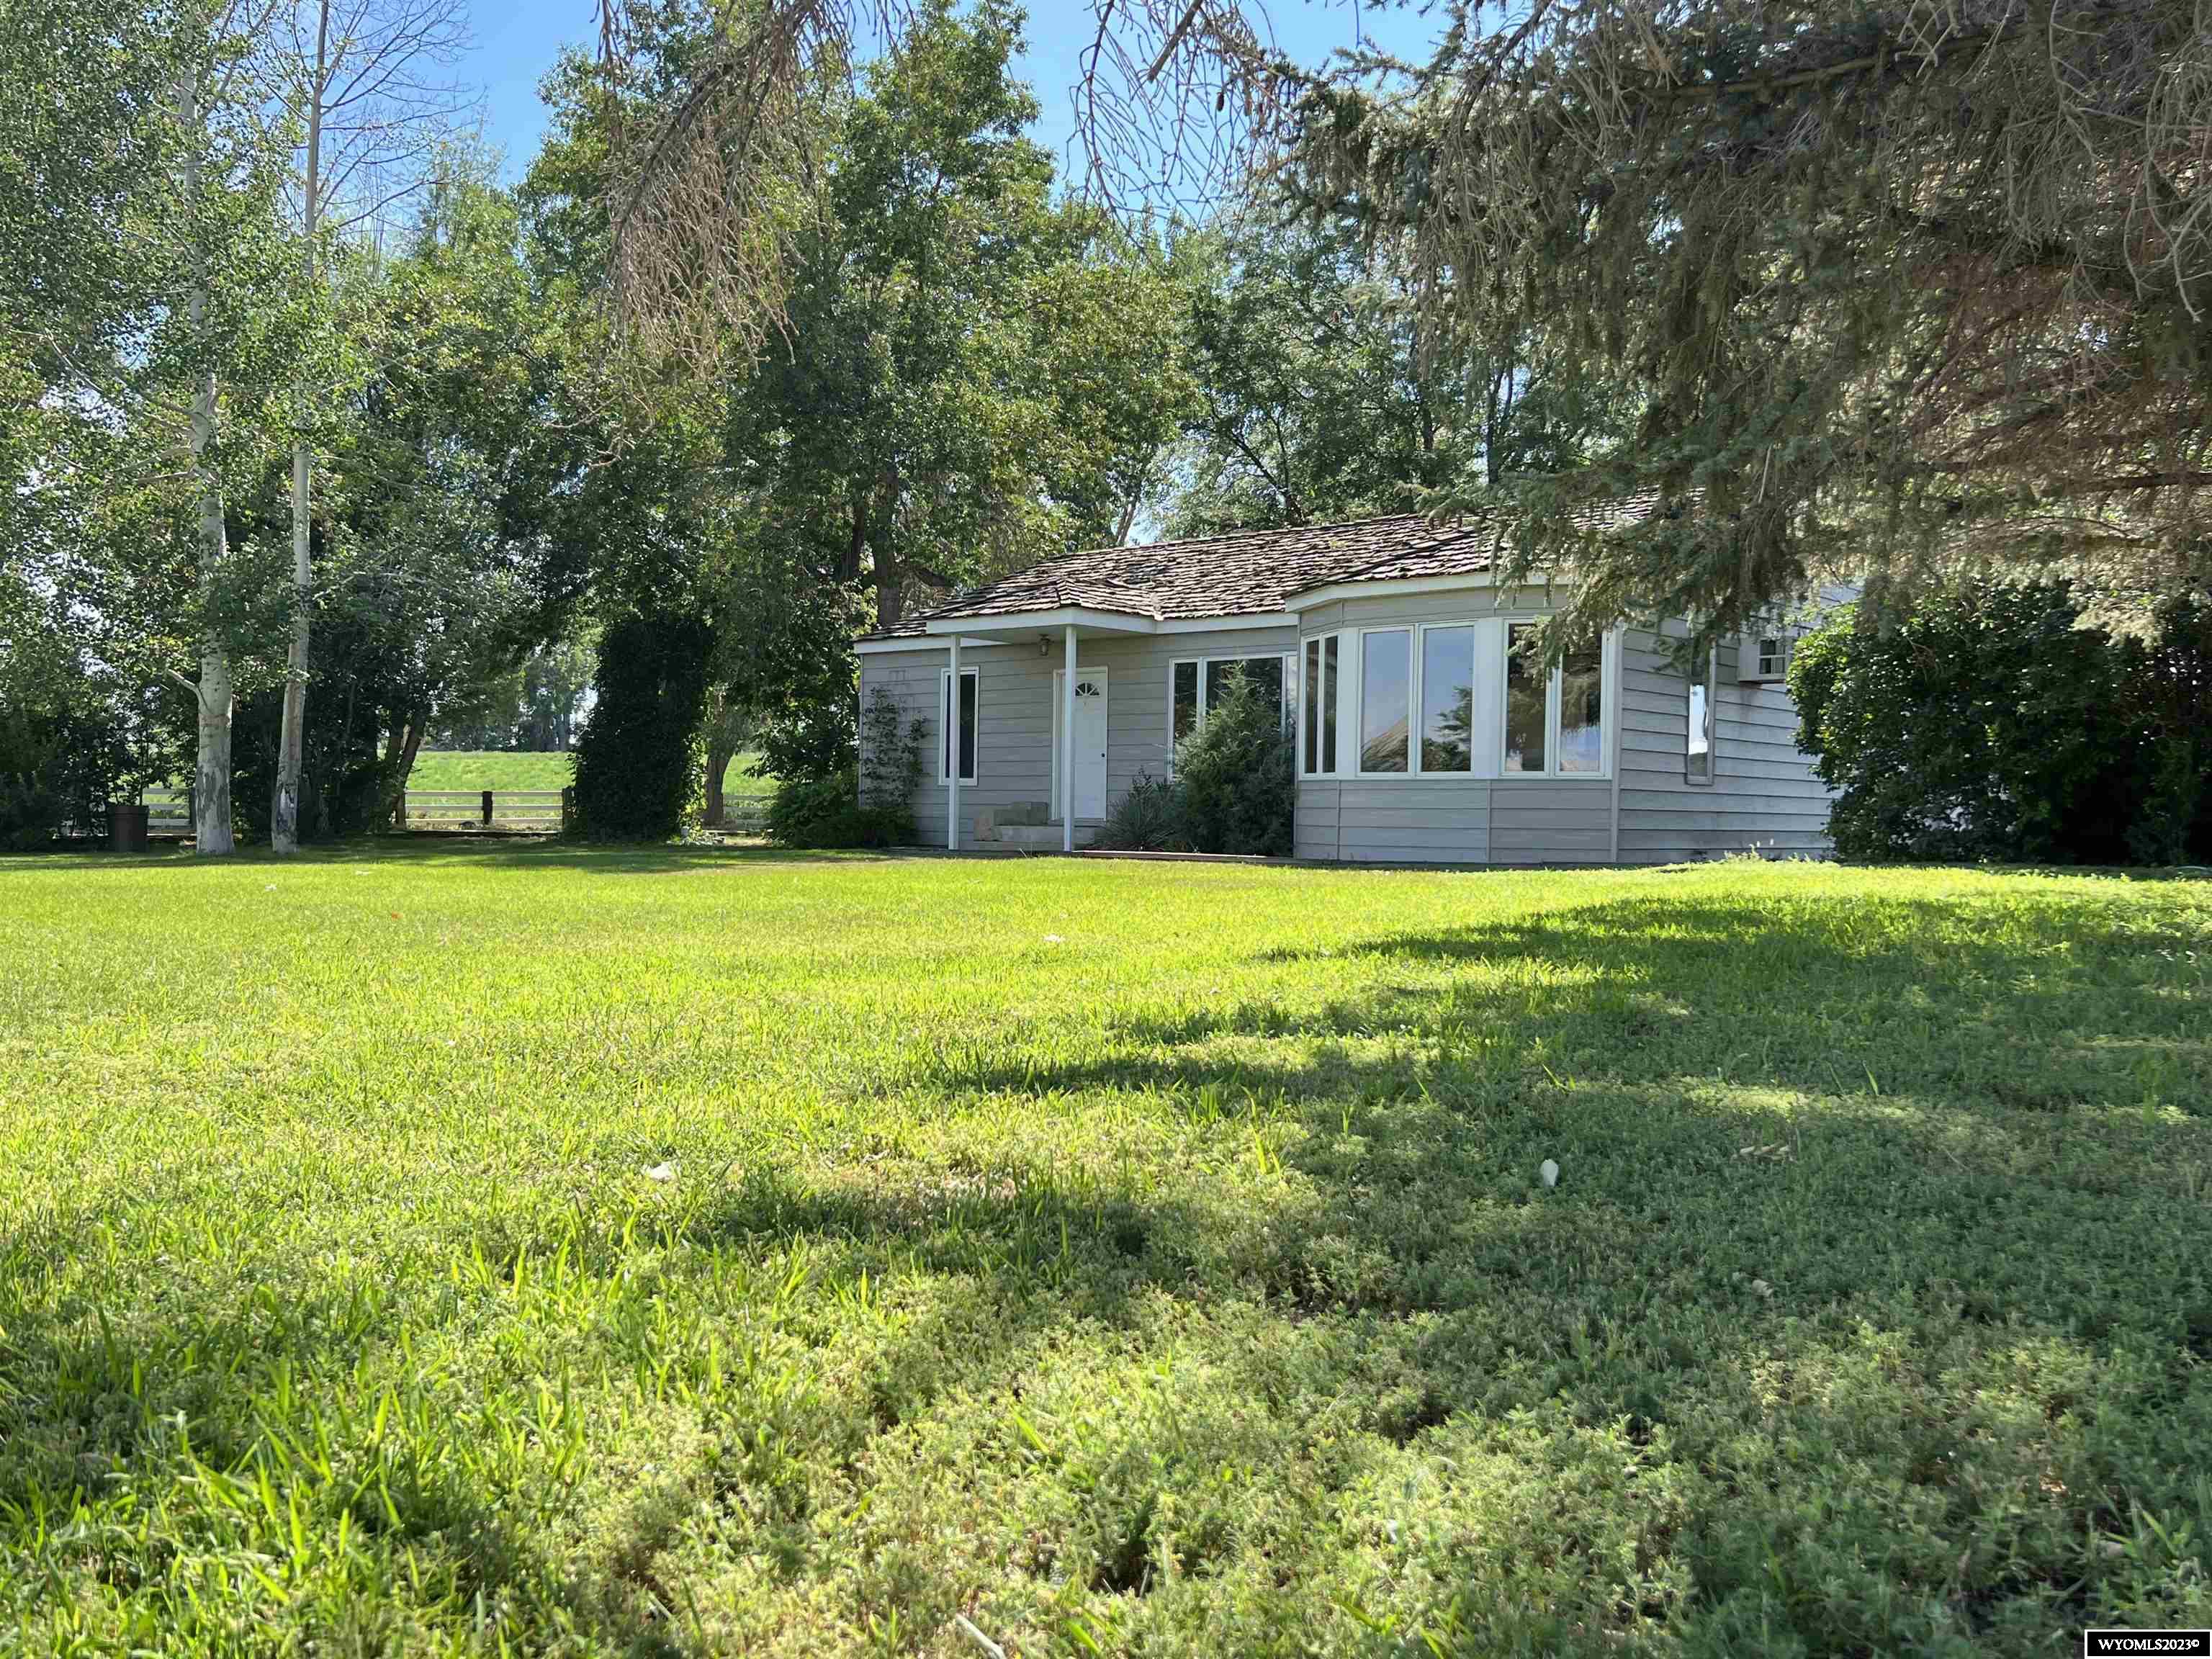 Views, comfort, trees, and SPACE! This 37.55+/- acre farm is one of a kind! You will be hard pressed to find another on the market with so much to offer. The fields are currently planted with grass/alfalfa hay and farmed by a neighbor. Behind the home is a 30'X40' shop with power. Beyond the shop is a set of corrals complete with a loading chute and feedlot setup.  The (mostly) updated 2 bed, 2 bath home with 2,632 SF living space has beautiful views all around with large rooms, one updated bathroom, and a huge mudroom. Watch the sun rise over Cloud Peak and the Big Horn Mountains while you sip your morning coffee through the huge bay windows in the dining room. The sunken sun room makes a perfect place for lounging or entertaining with concrete patio of the sliding door.  Just off the sunroom is a cozy den with an open hearth fireplace. Original hardwood floors have been refinished in the majority of the home and there is a partial basement area that could be finished into additional bedrooms or left as is for storage/pantry space.